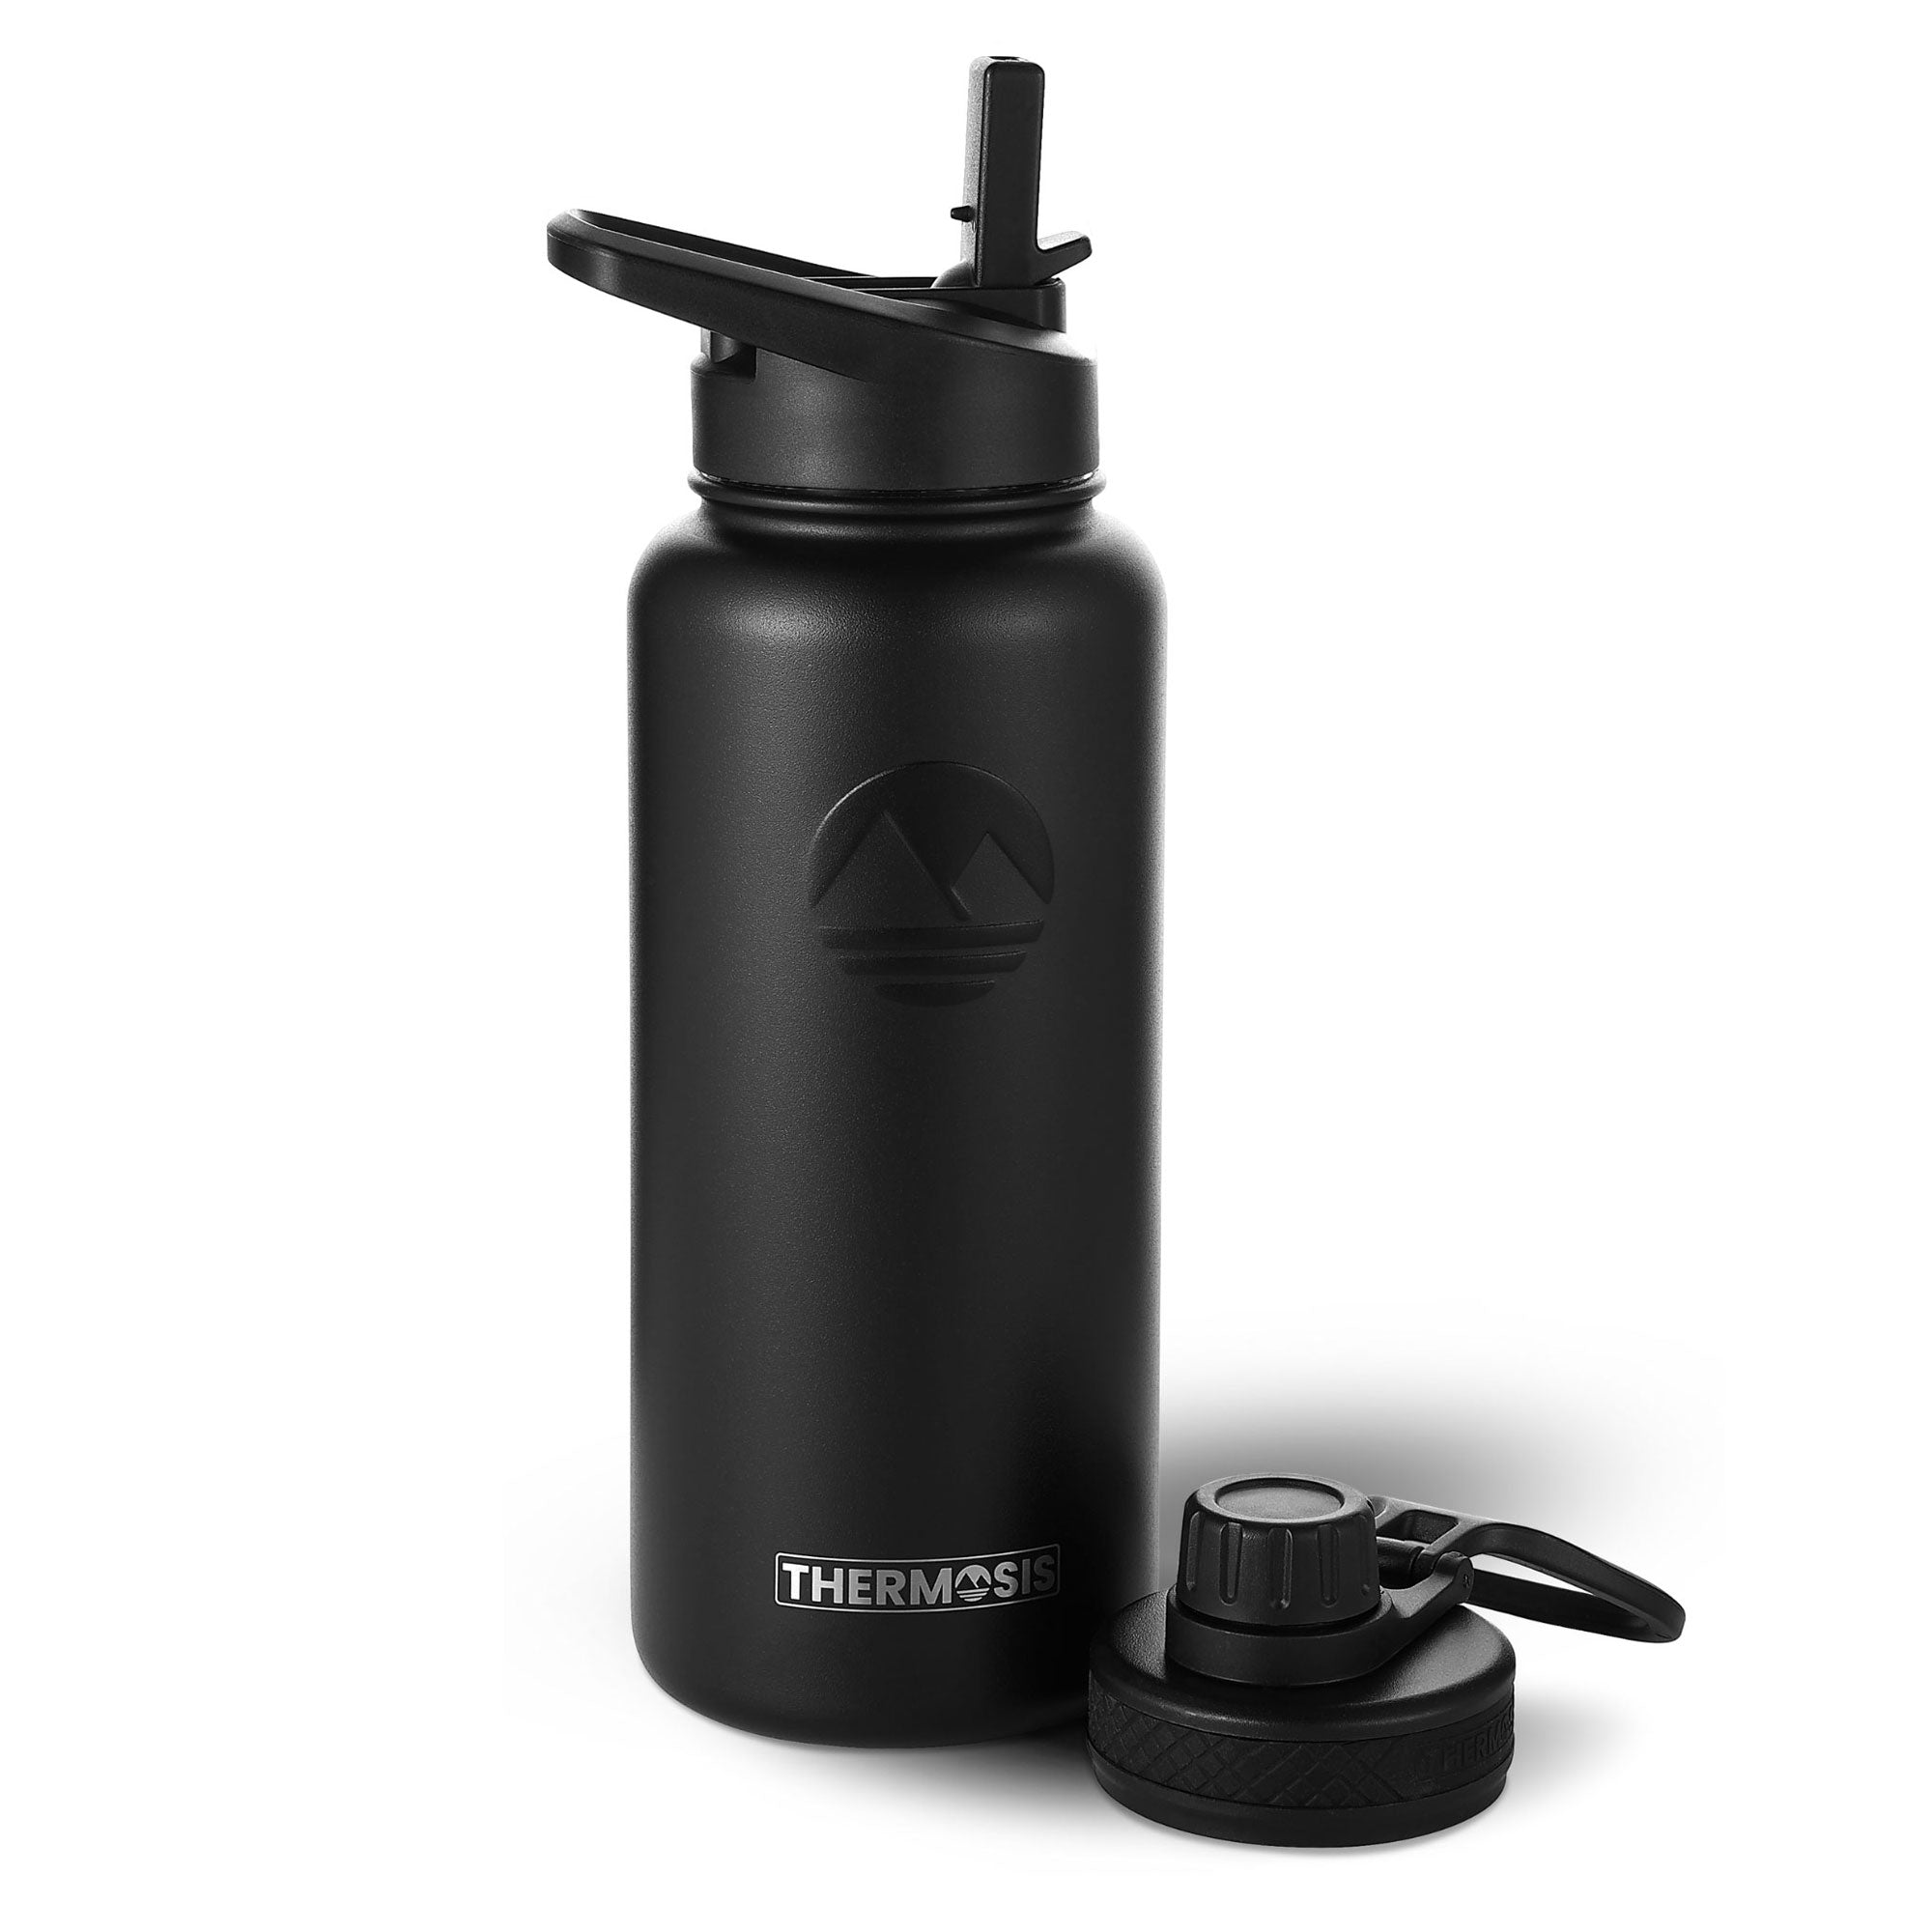 32 oz stainless steel water bottle.bpa-free, leakproof, does not absorb  odors